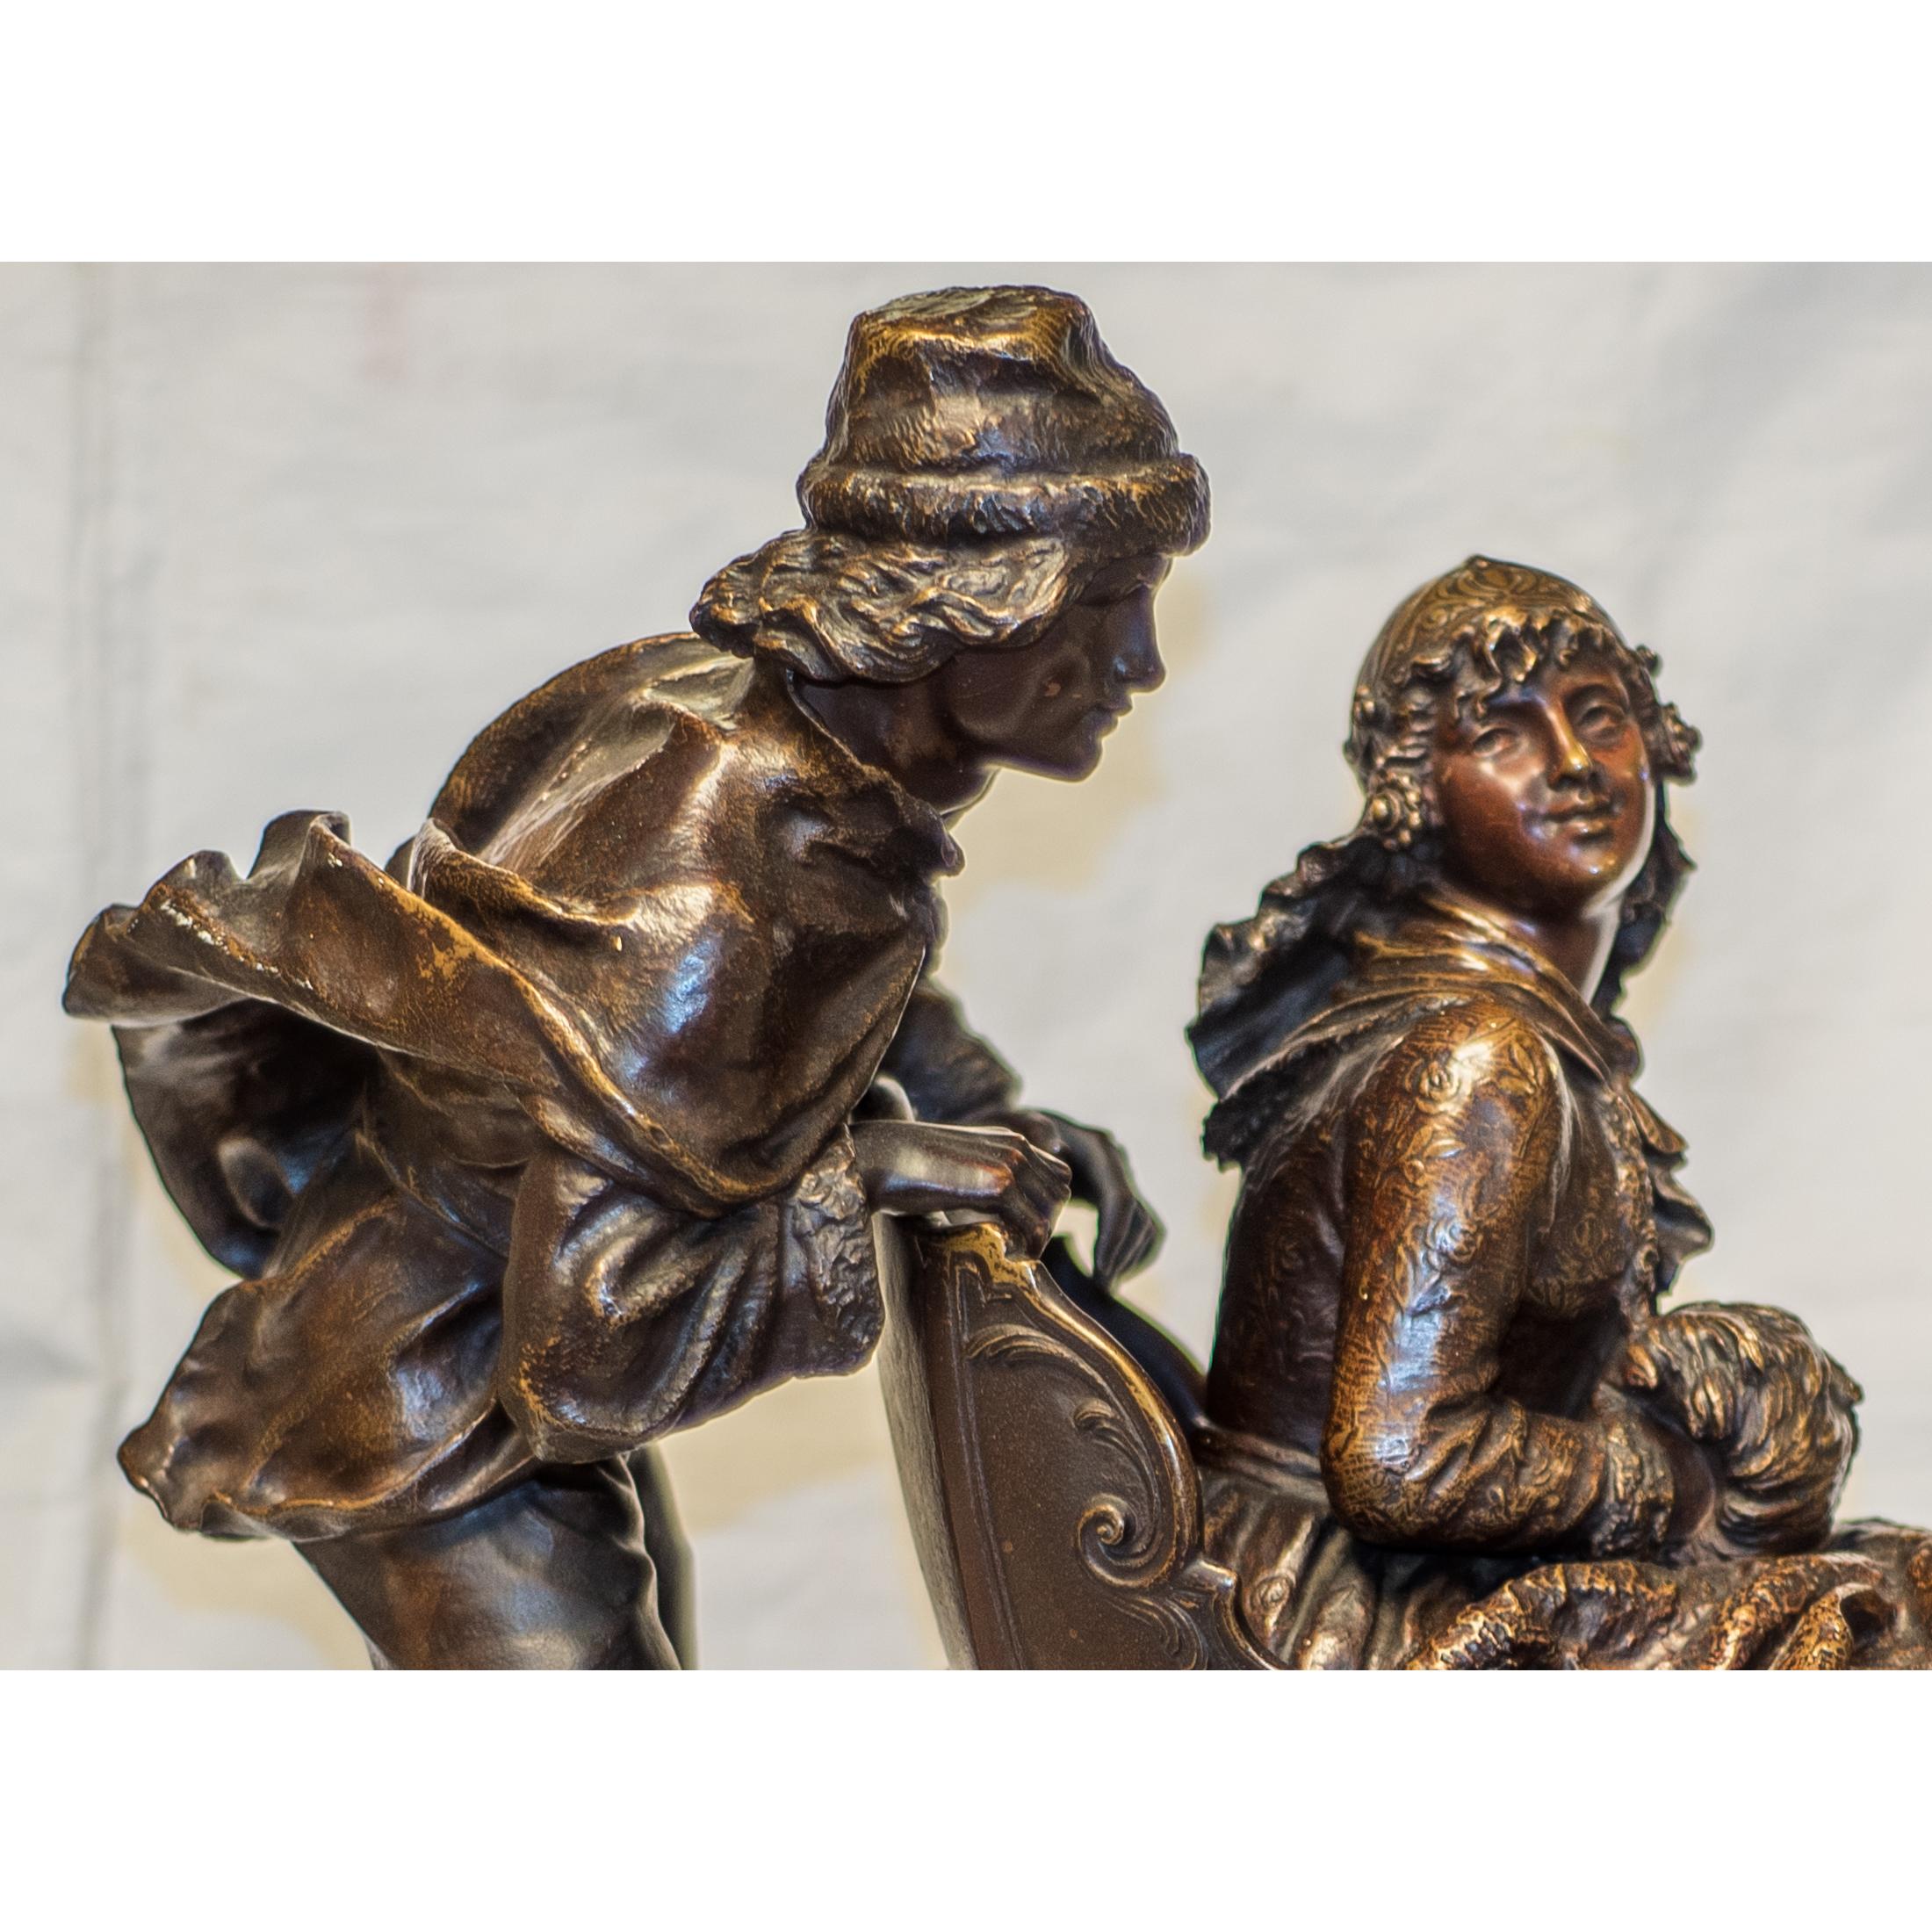 A fine patinated bronze sculpture of a man pushing the woman’s sled by Charles Ferville-Suan.
A winter scene of a man on skates, pushing the woman’s sled mounted, on onyx and wood base; signed in cast,